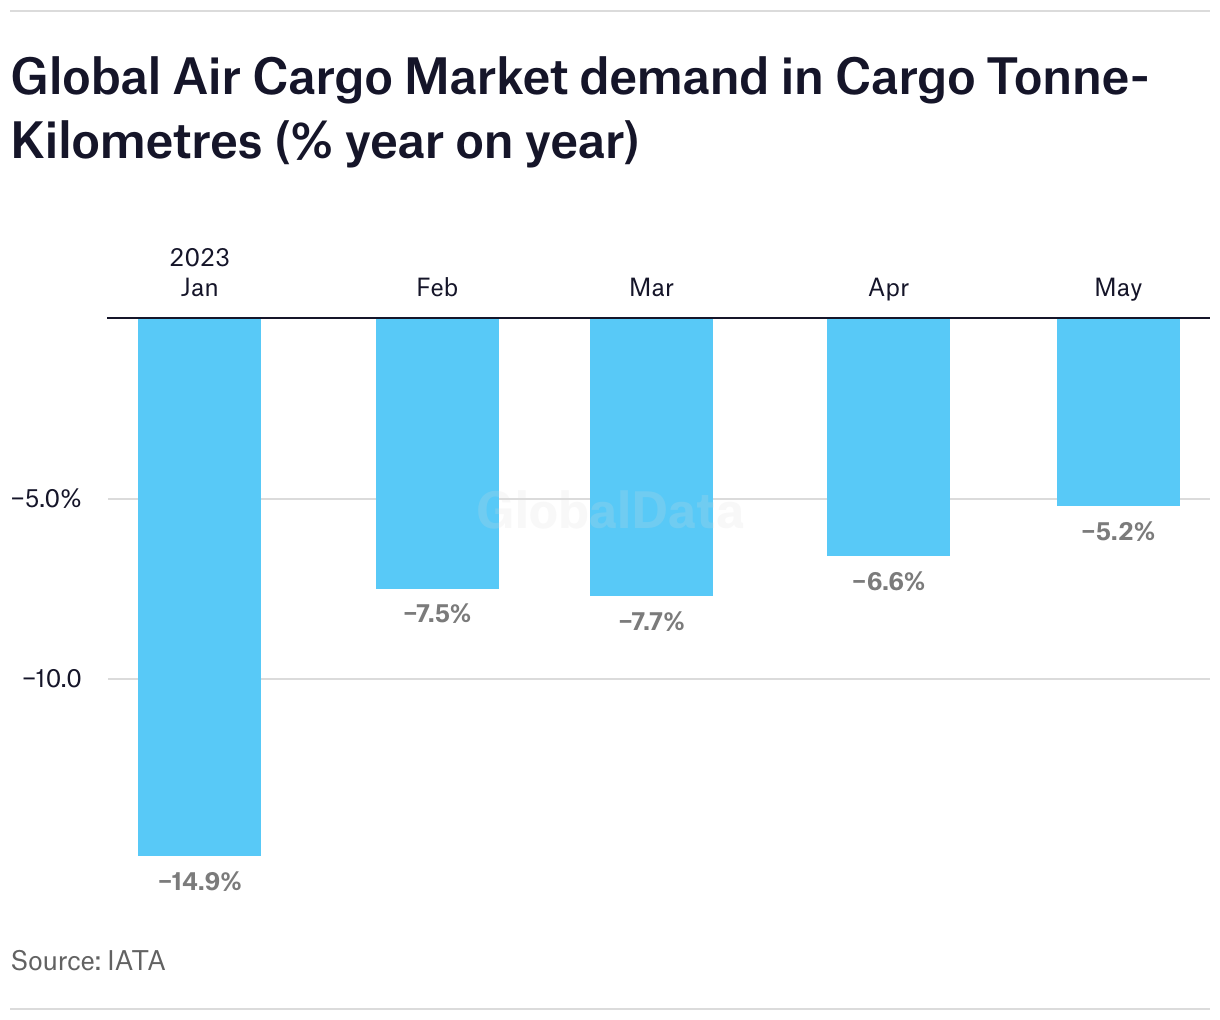 A chart showing the global air cargo market demand in 2023 as a year on year percentage, measured in cargo tonne-kilometers. January shows a 14.9% drop, February shows a 7.5% drop, March shows a 7.7% drop, April shows a 6.6% drop and May shows a 5.2% drop.